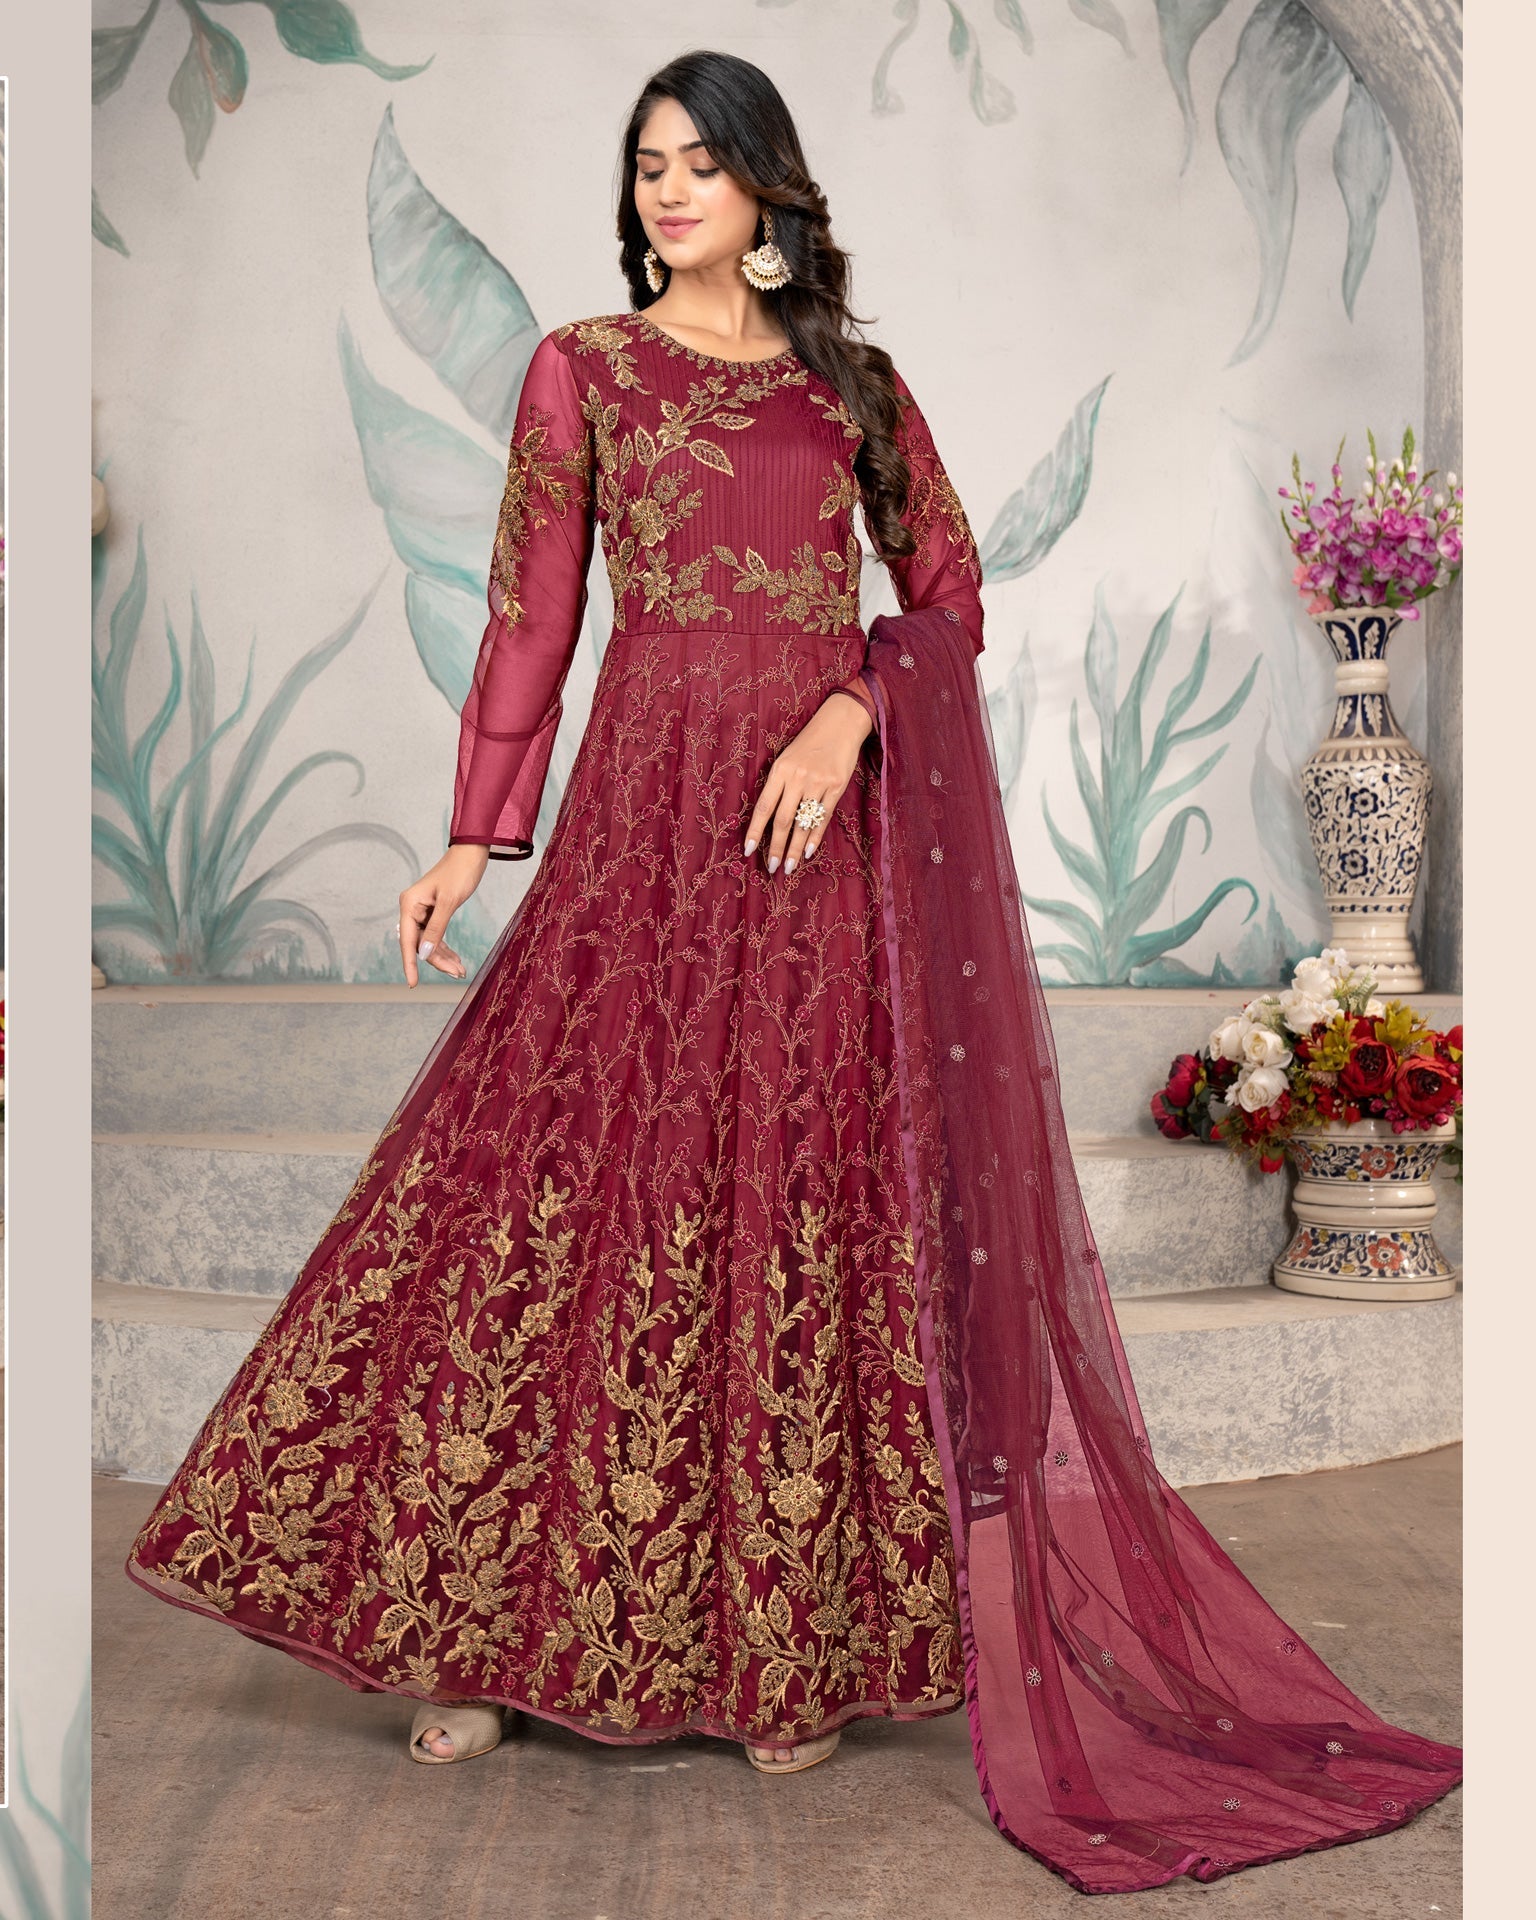 Maroon Net Anarkali Embroidered Suit Frock Suit With Dupatta